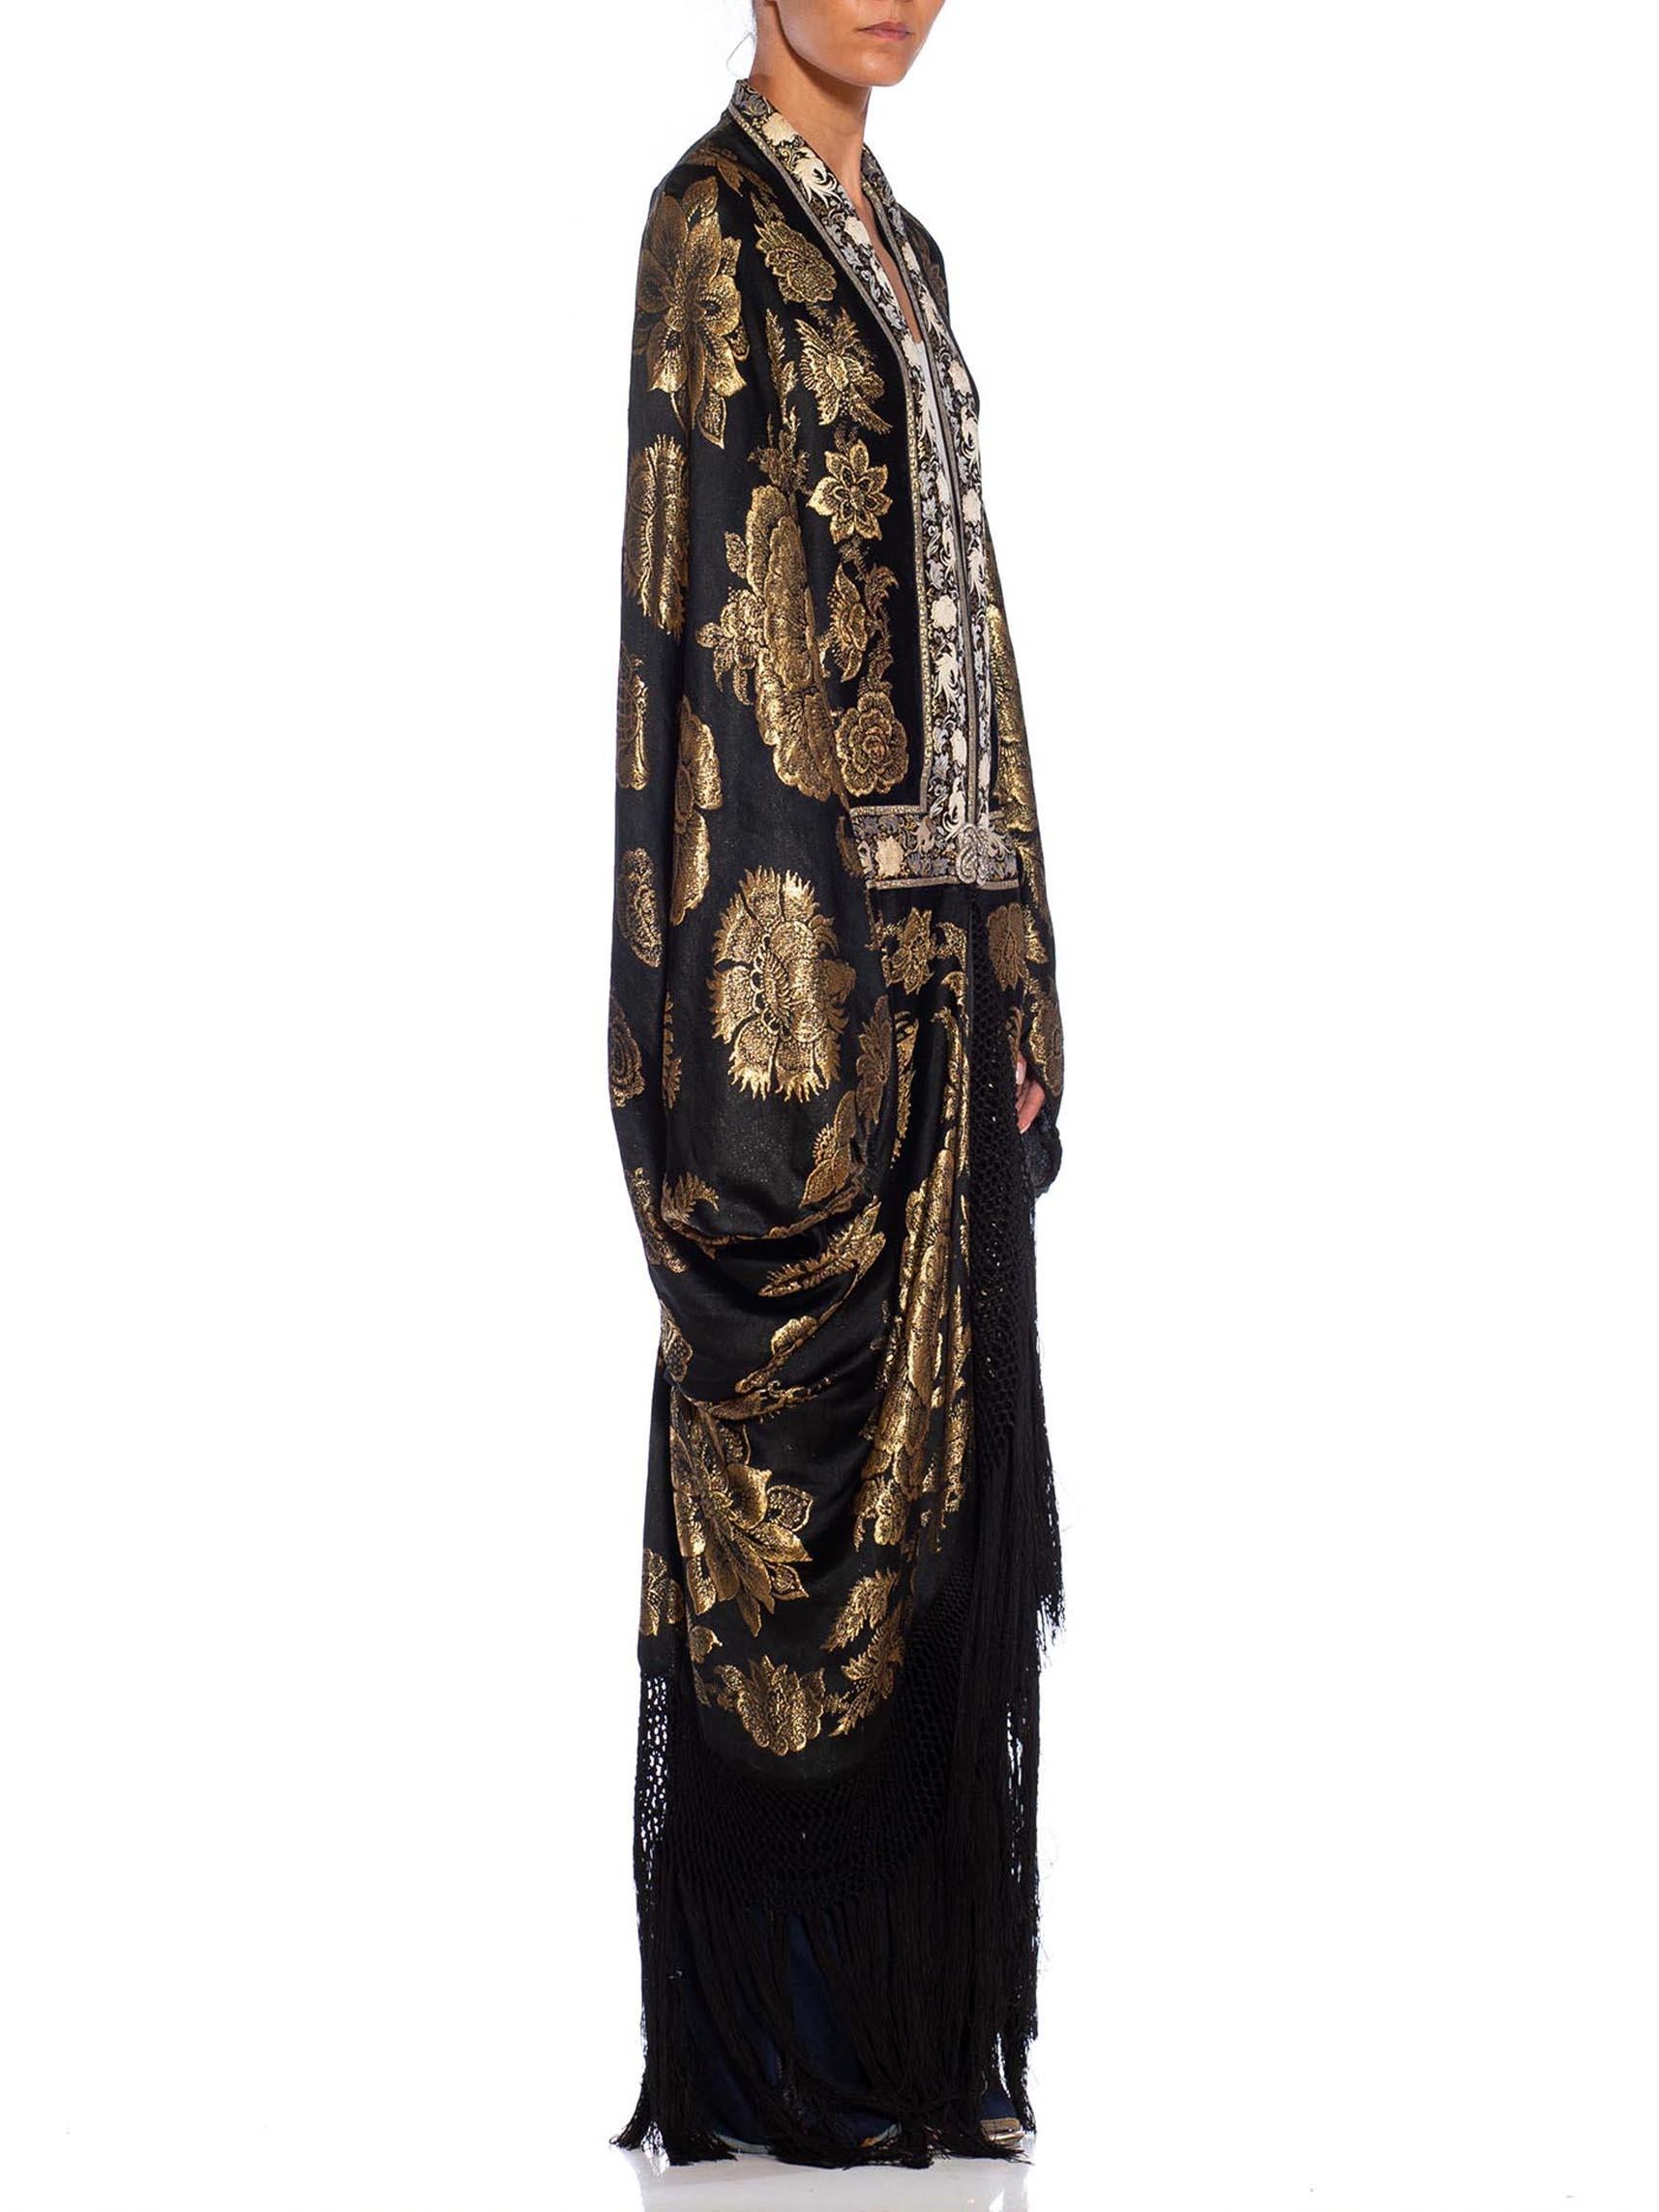 MORPHEW COLLECTION Black, Gold & Cream Metallic Silk Lamé Cocoon With Fringe An In Excellent Condition For Sale In New York, NY